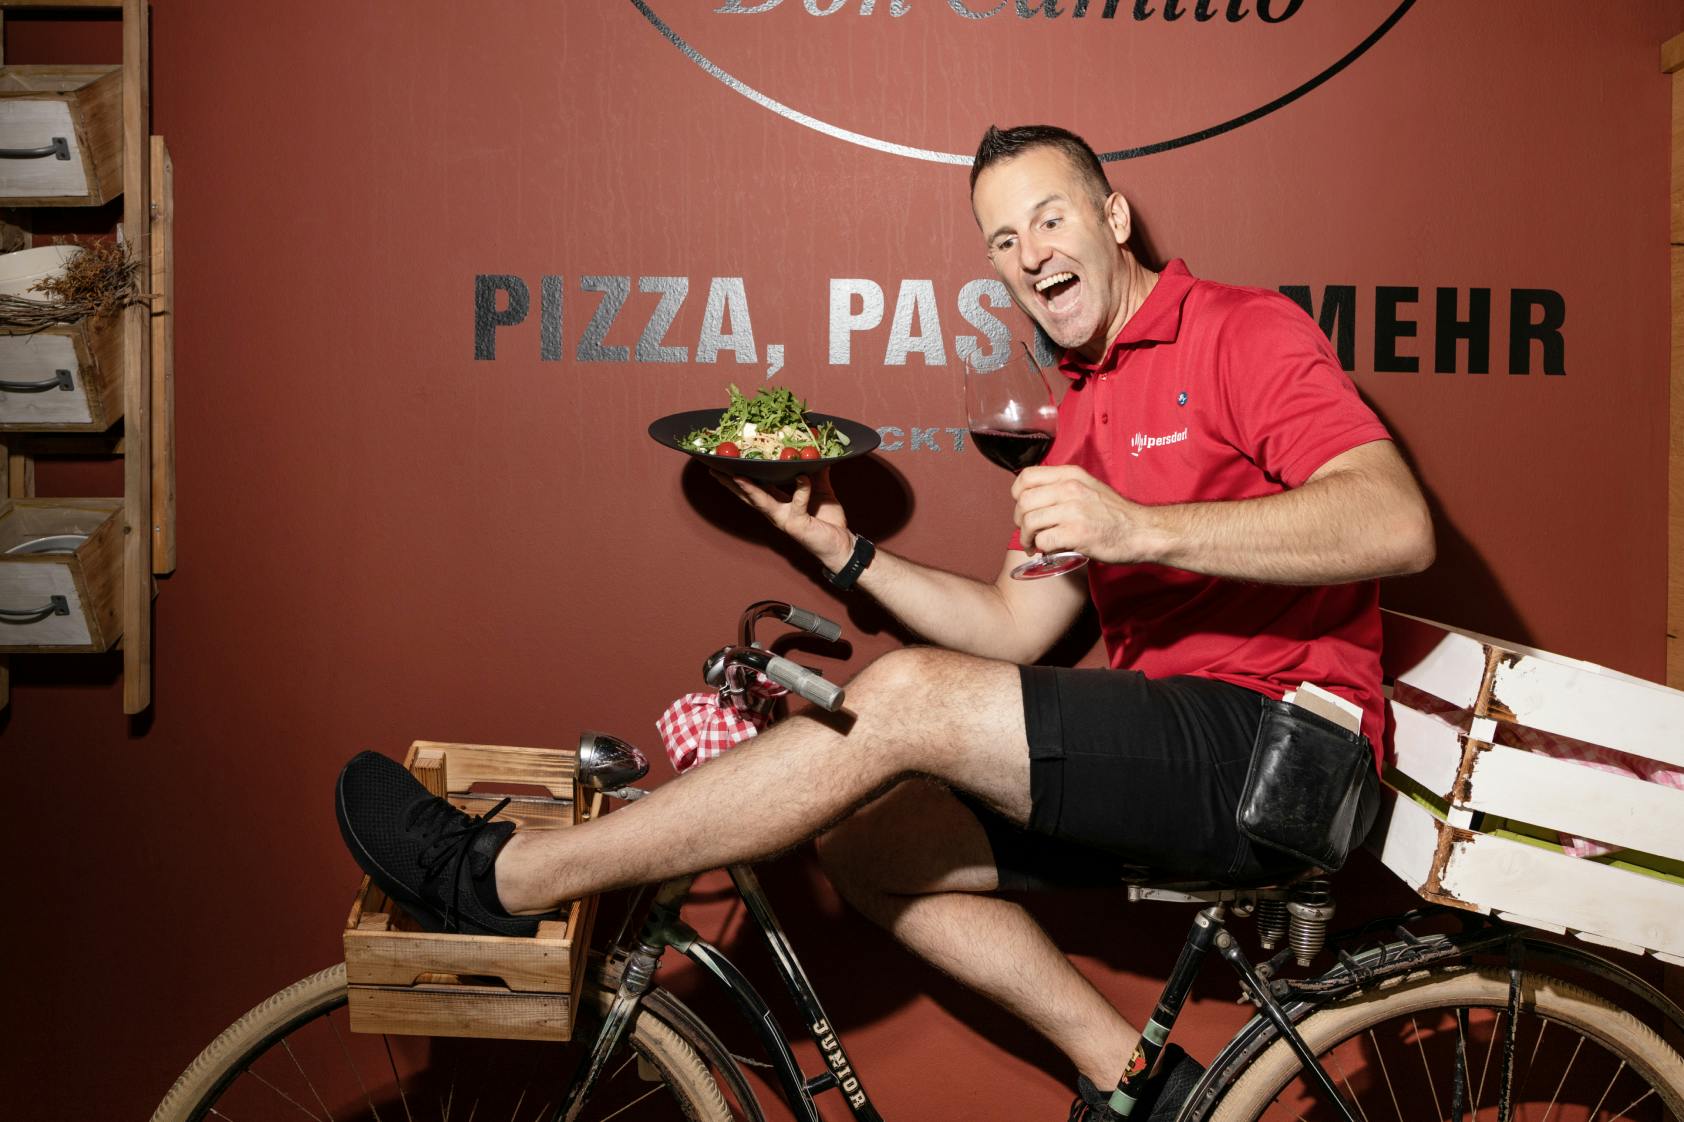 A waiter juggles a plate on a bicycle.